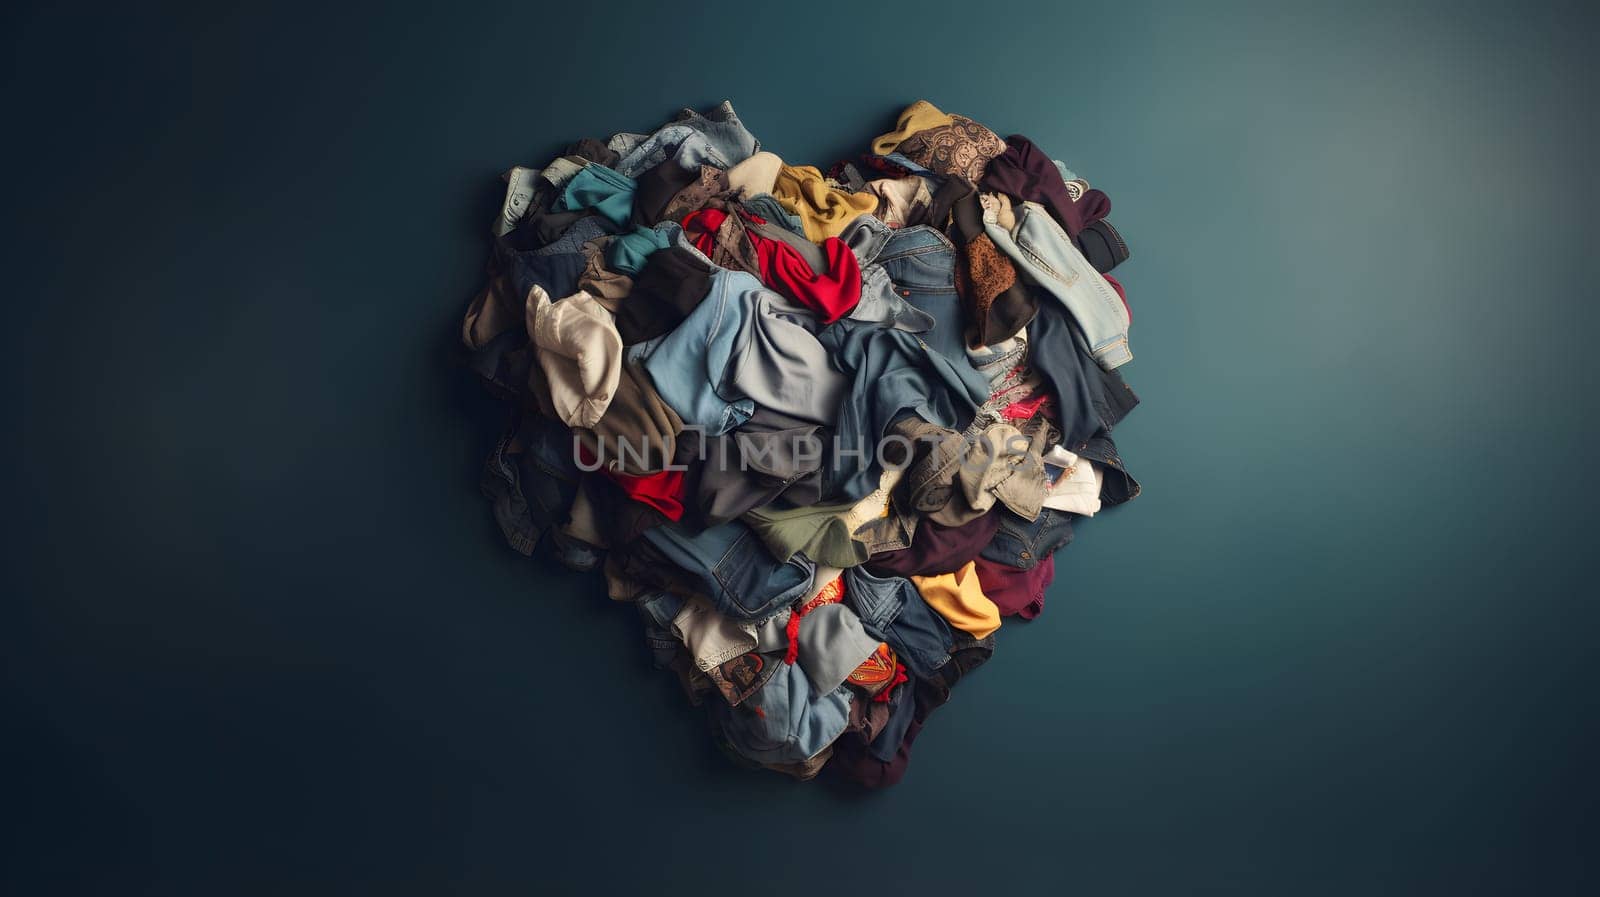 used clothes folded to form a heart on grey background, neural network generated photorealistic image by z1b